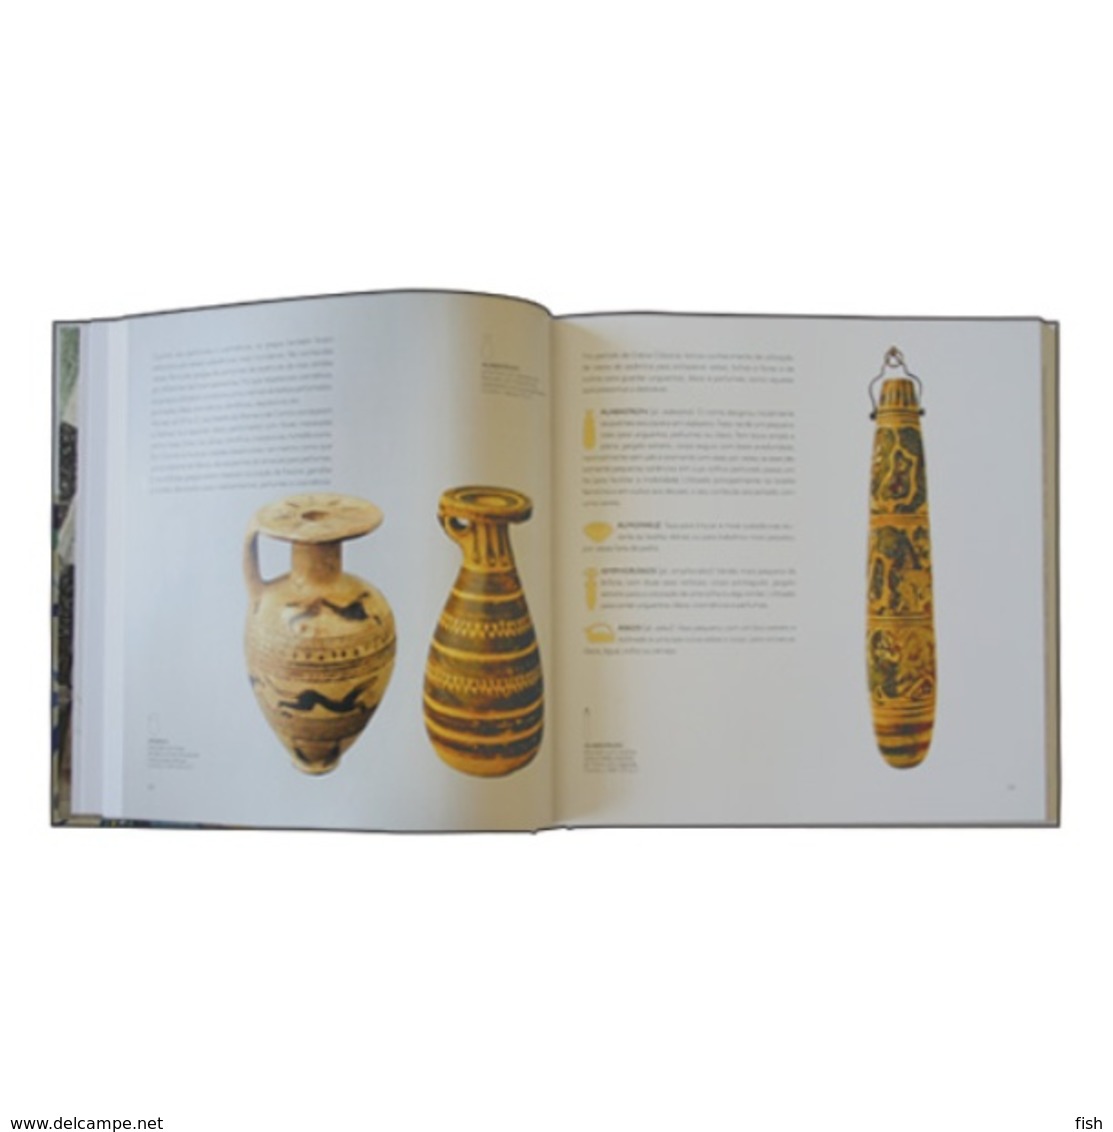 Portugal ** & CTT, Thematic Book With Stamps, Pharmaceutical Ceramics And The Art Of Healing 2009 (20195) - Book Of The Year